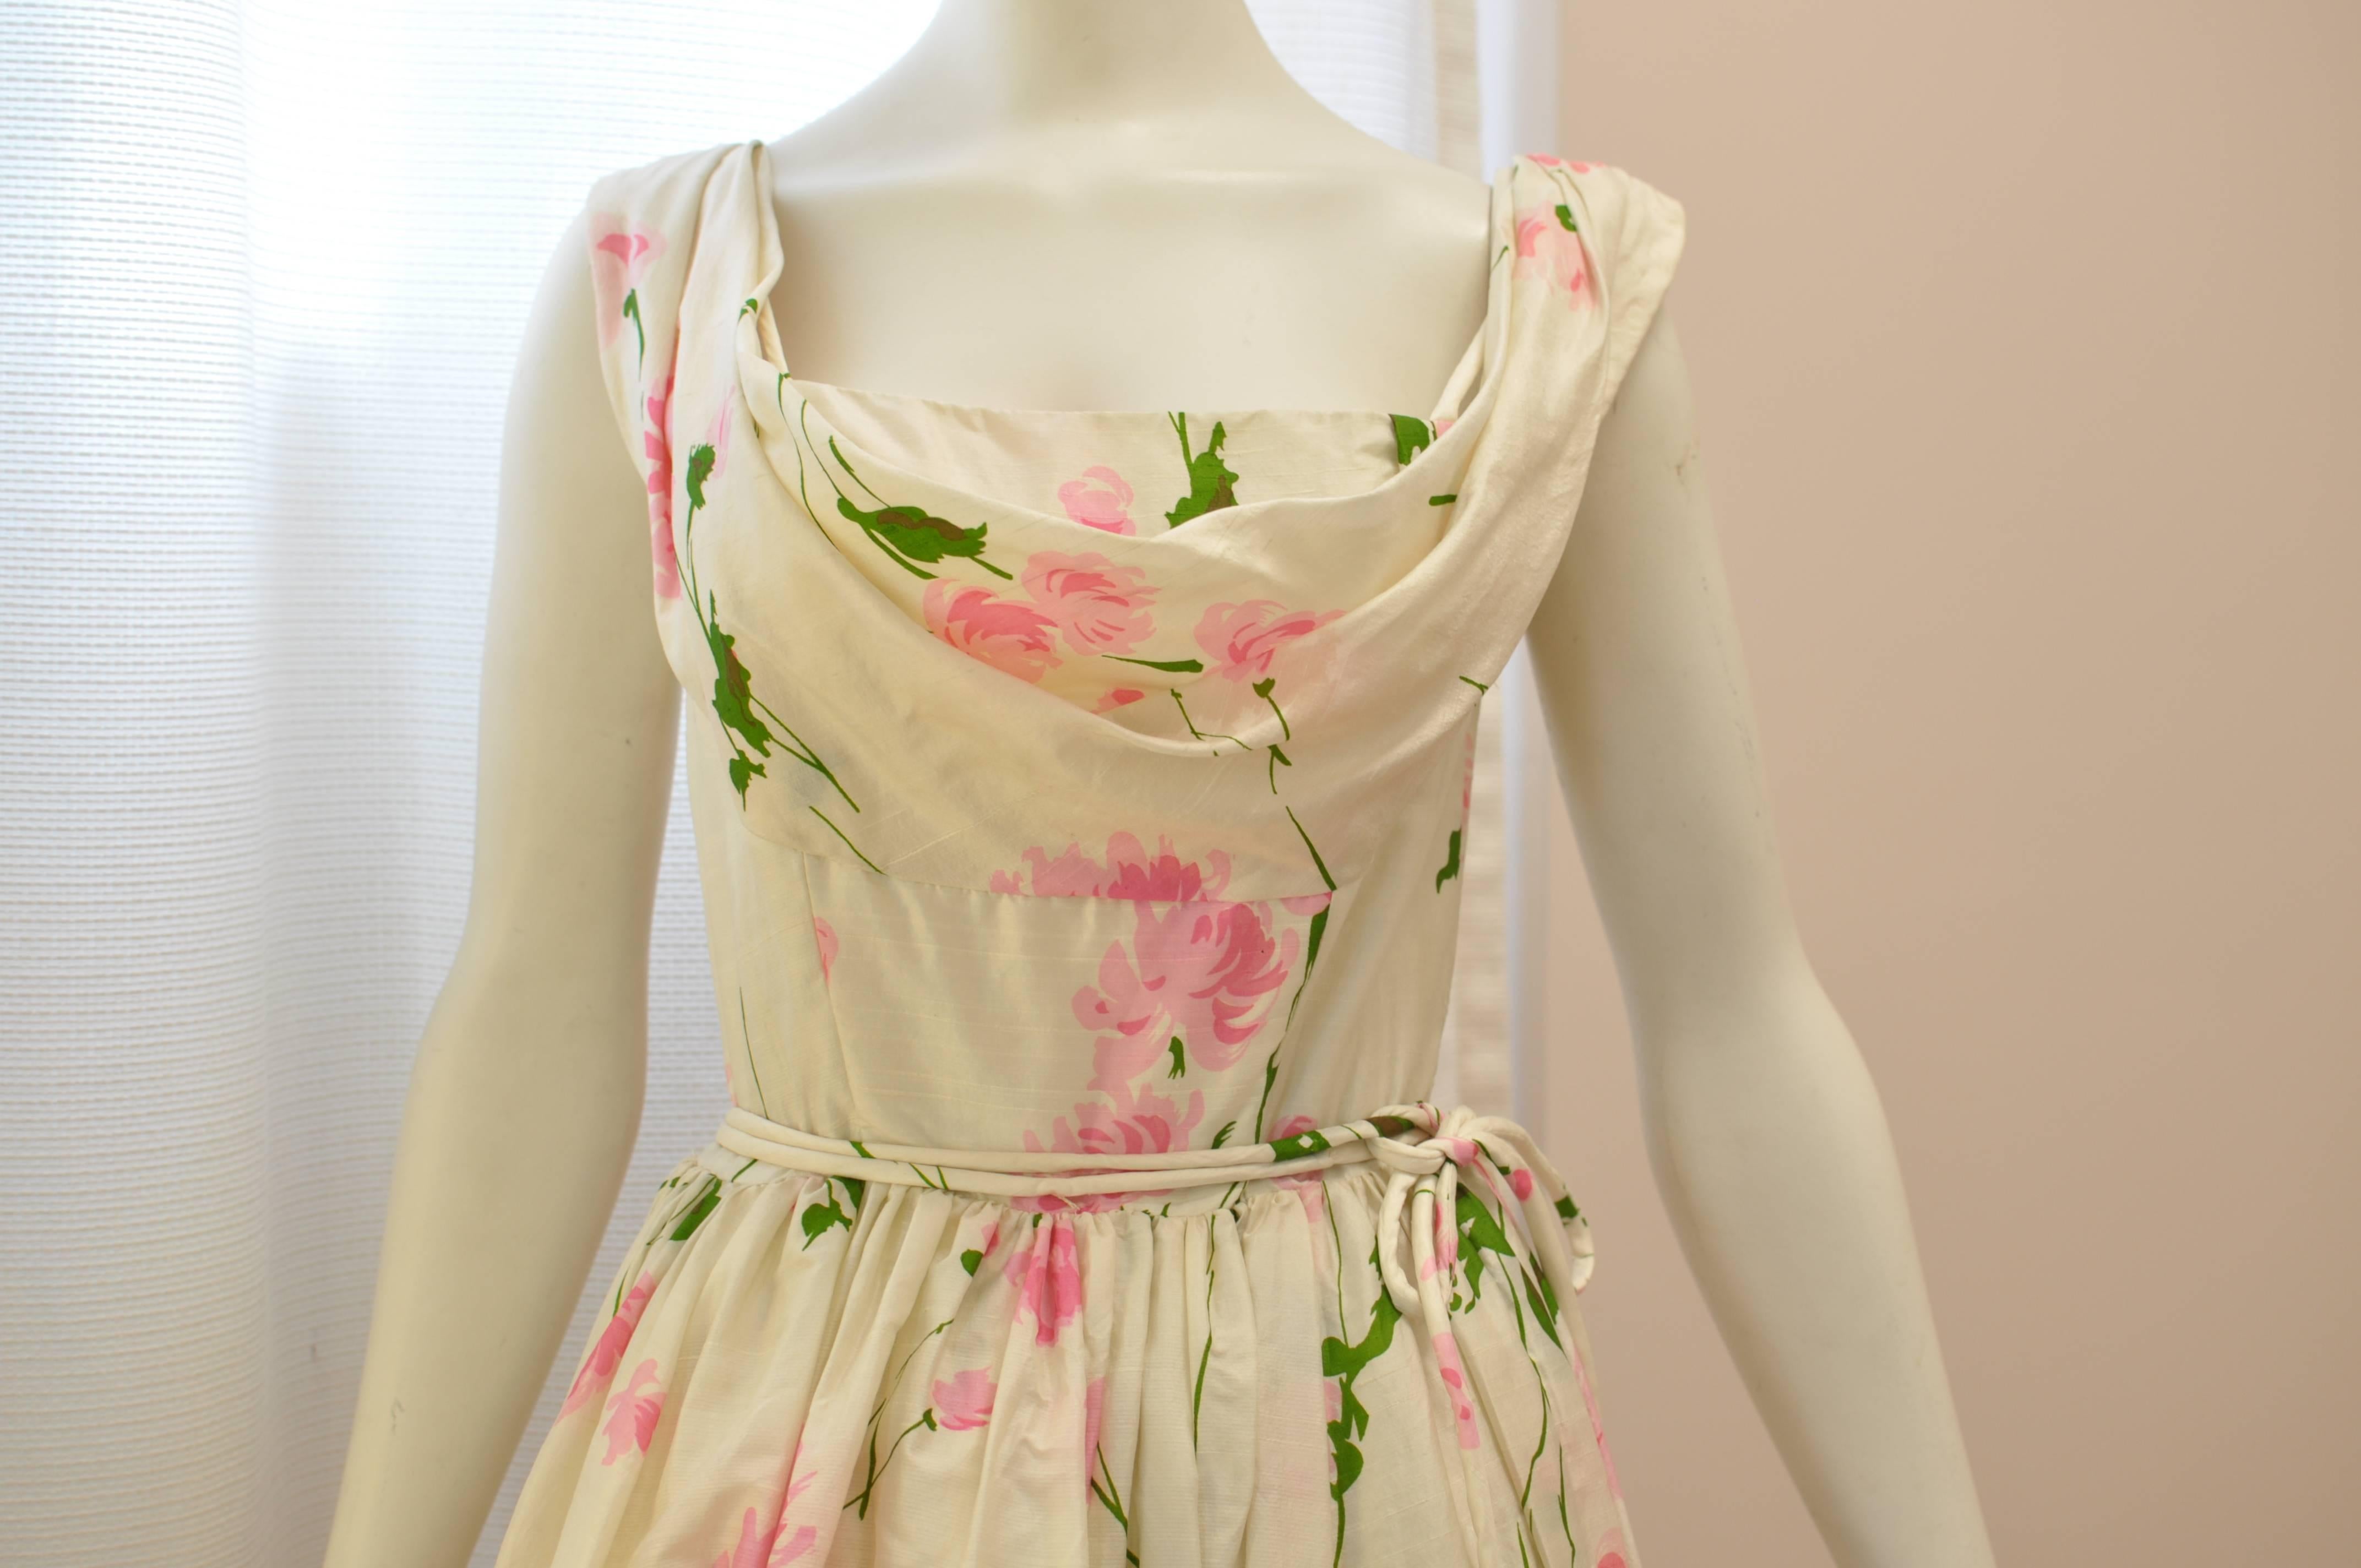 Tea dress or cocktail dress, this is a beautiful dress with a floral print on an ivory background. The fitted bodice has a double neckline one being a cowl, and there are also stays at the bust. The skirt is flared with the help of a stiff